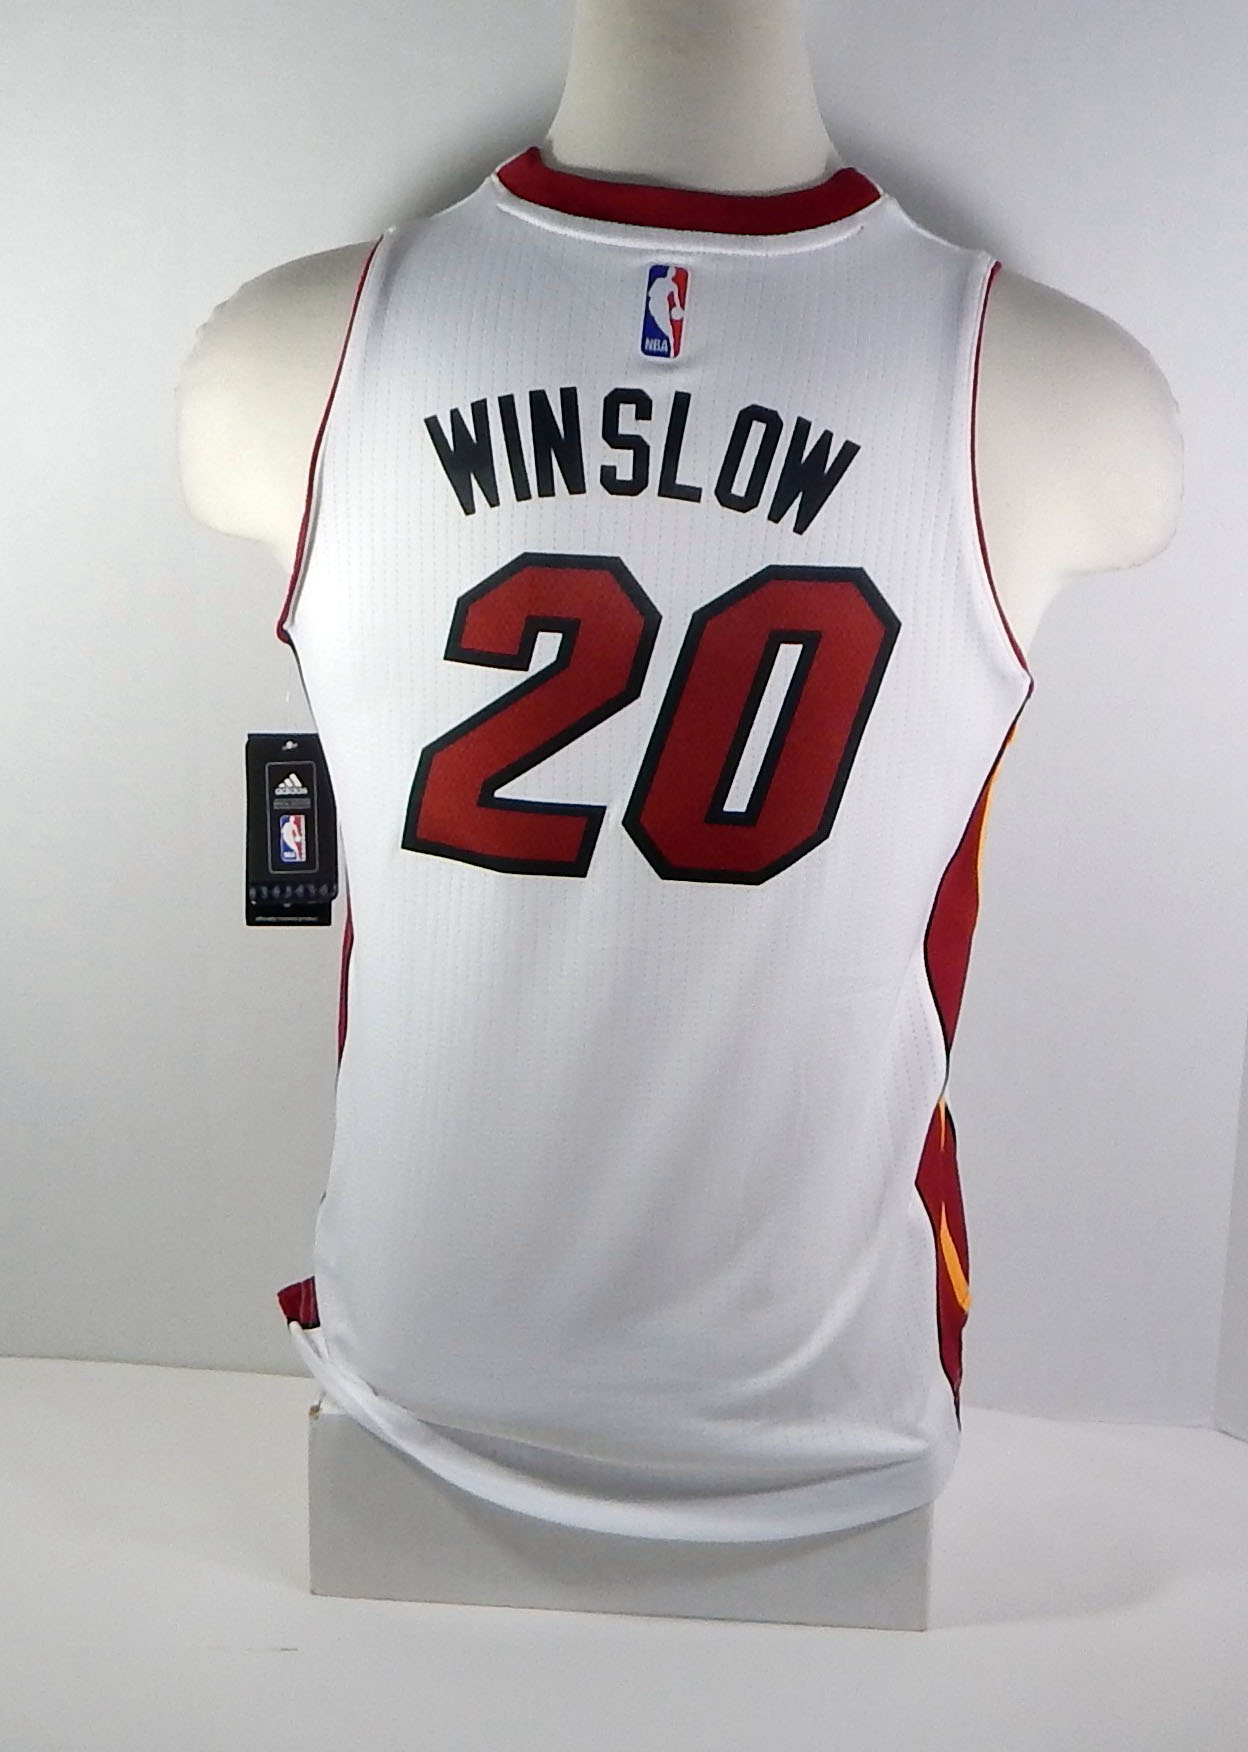 justise winslow jersey miami heat